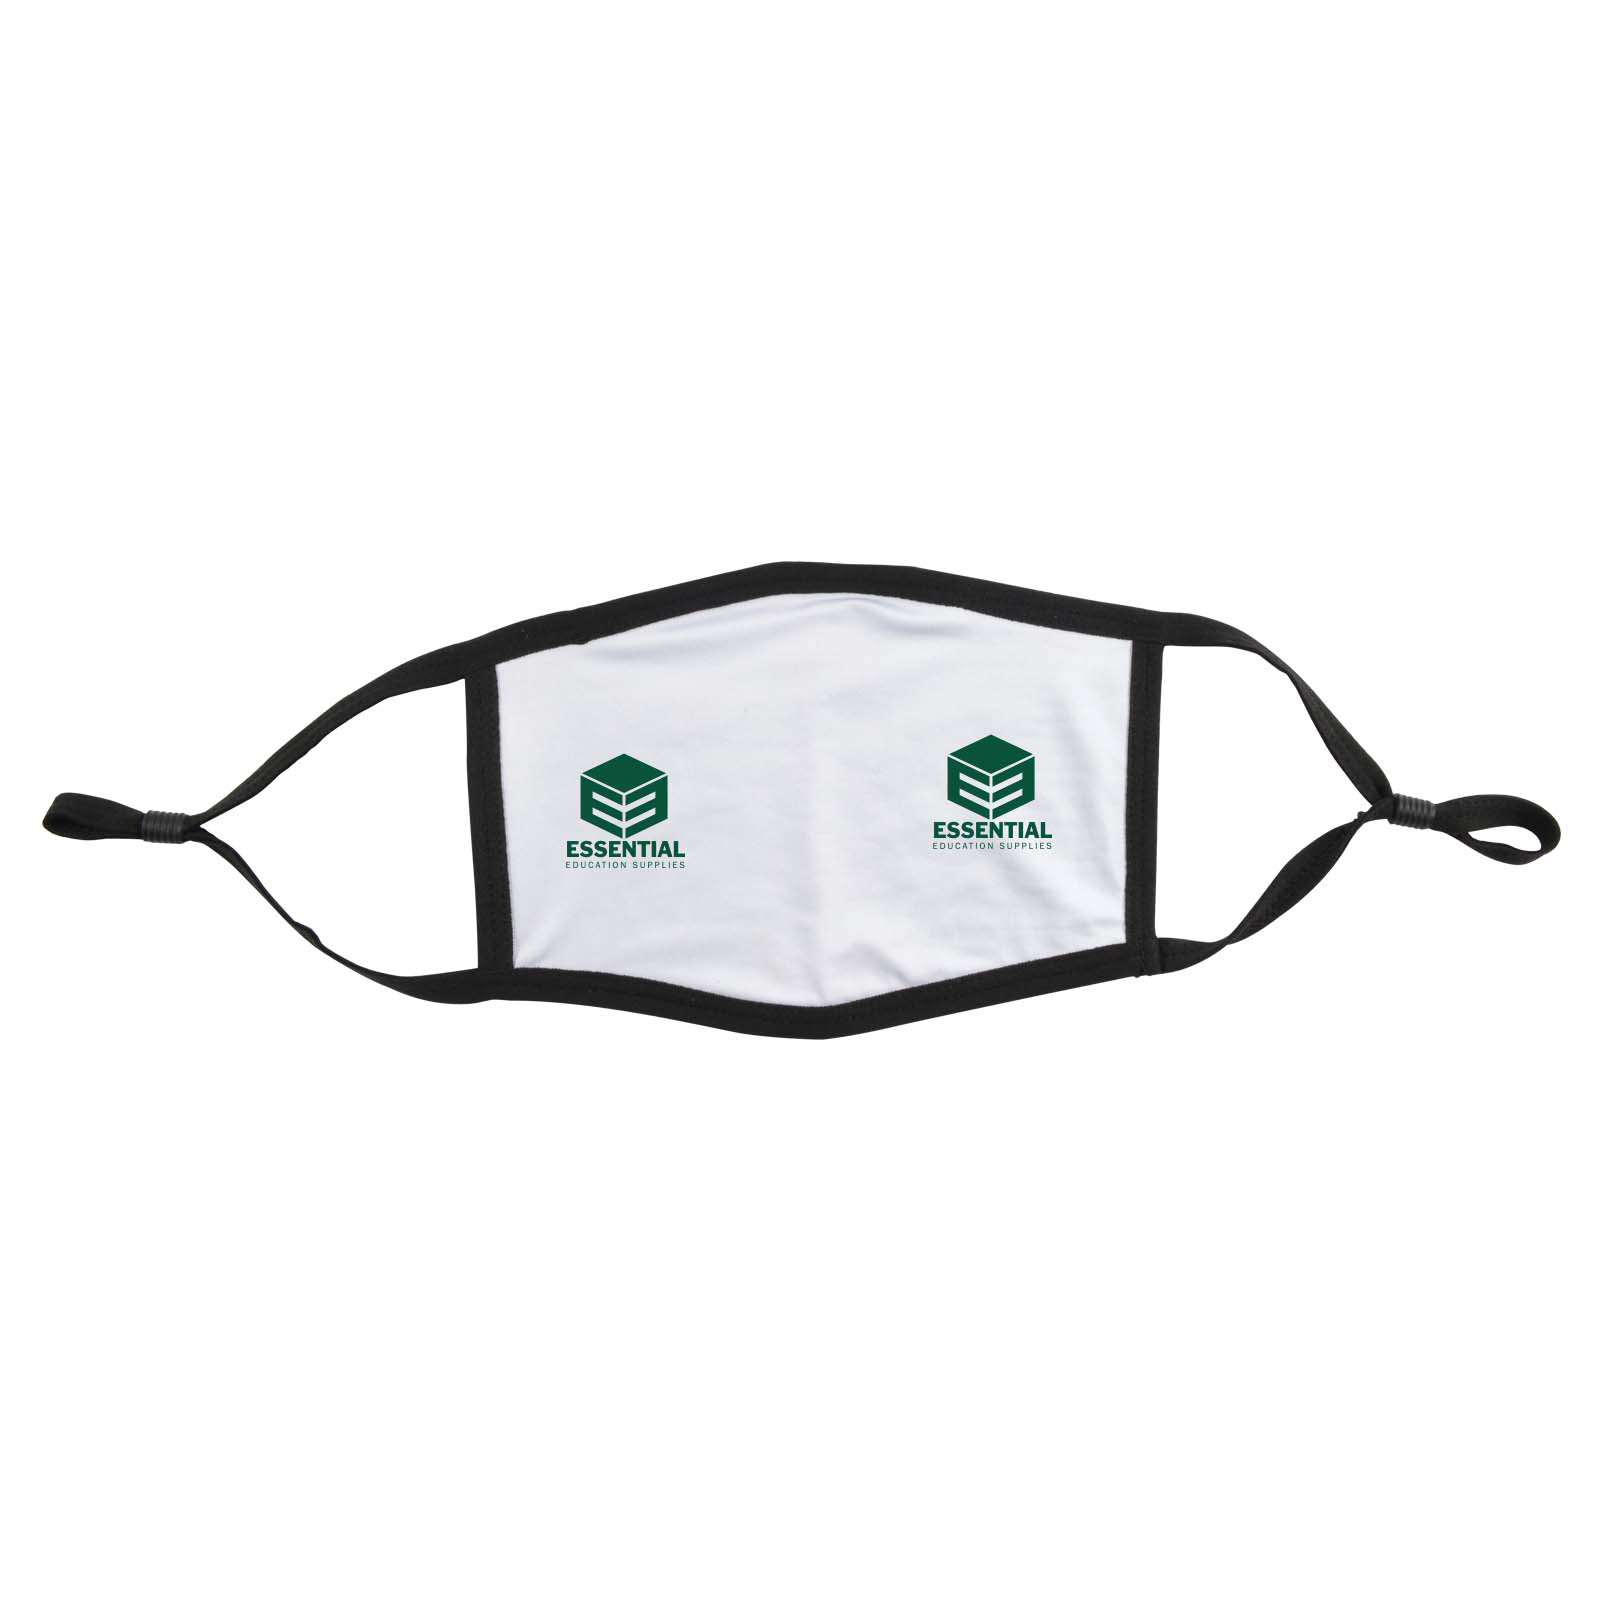 Promotional Shield Cotton Face Mask Online In Perth